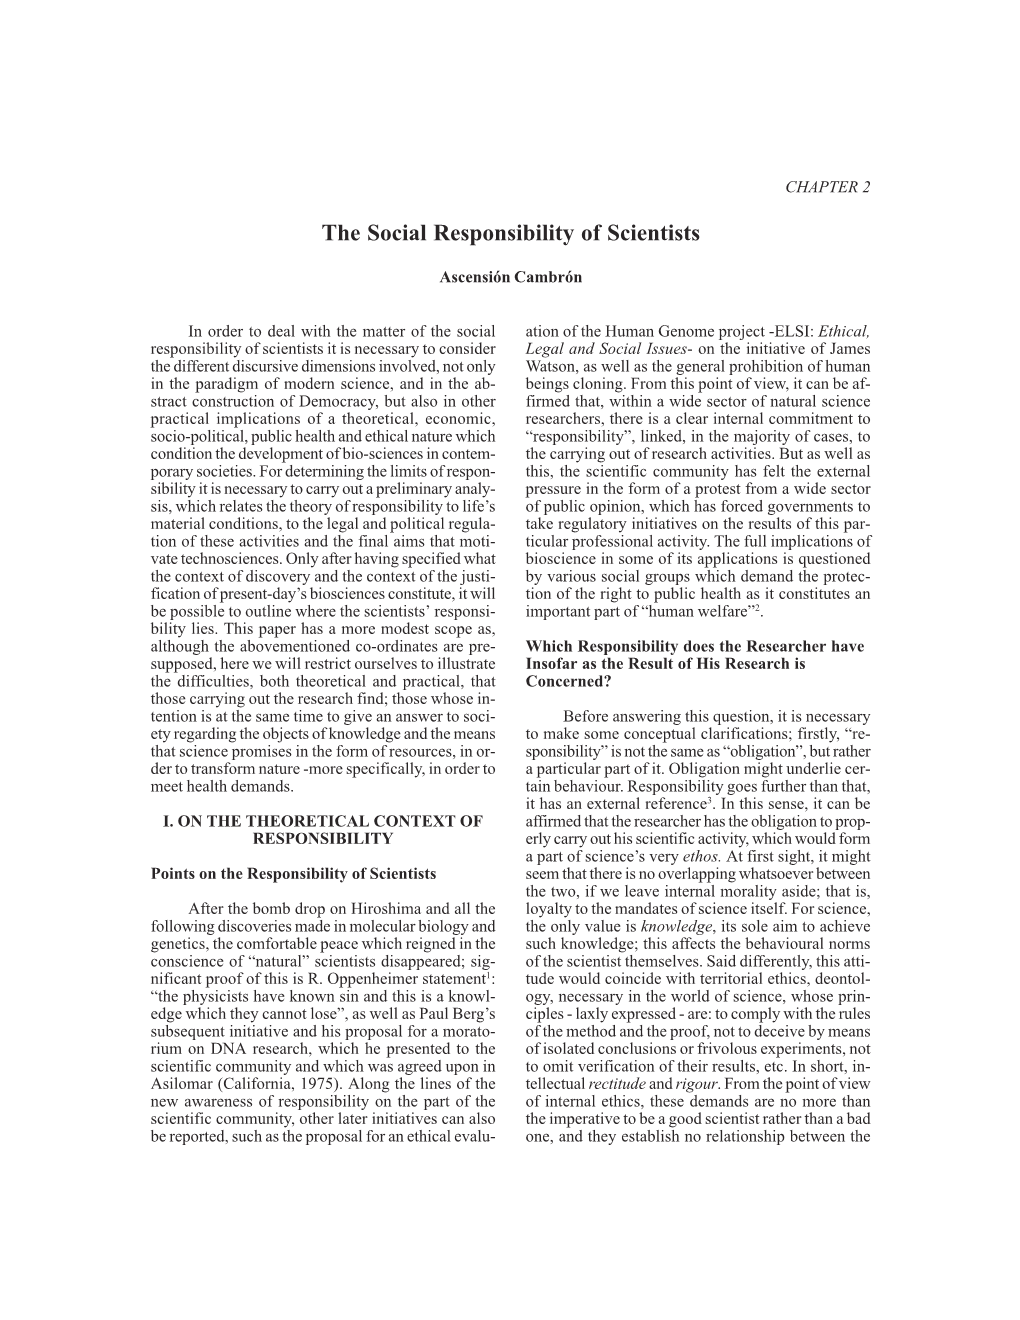 The Social Responsibility of Scientists